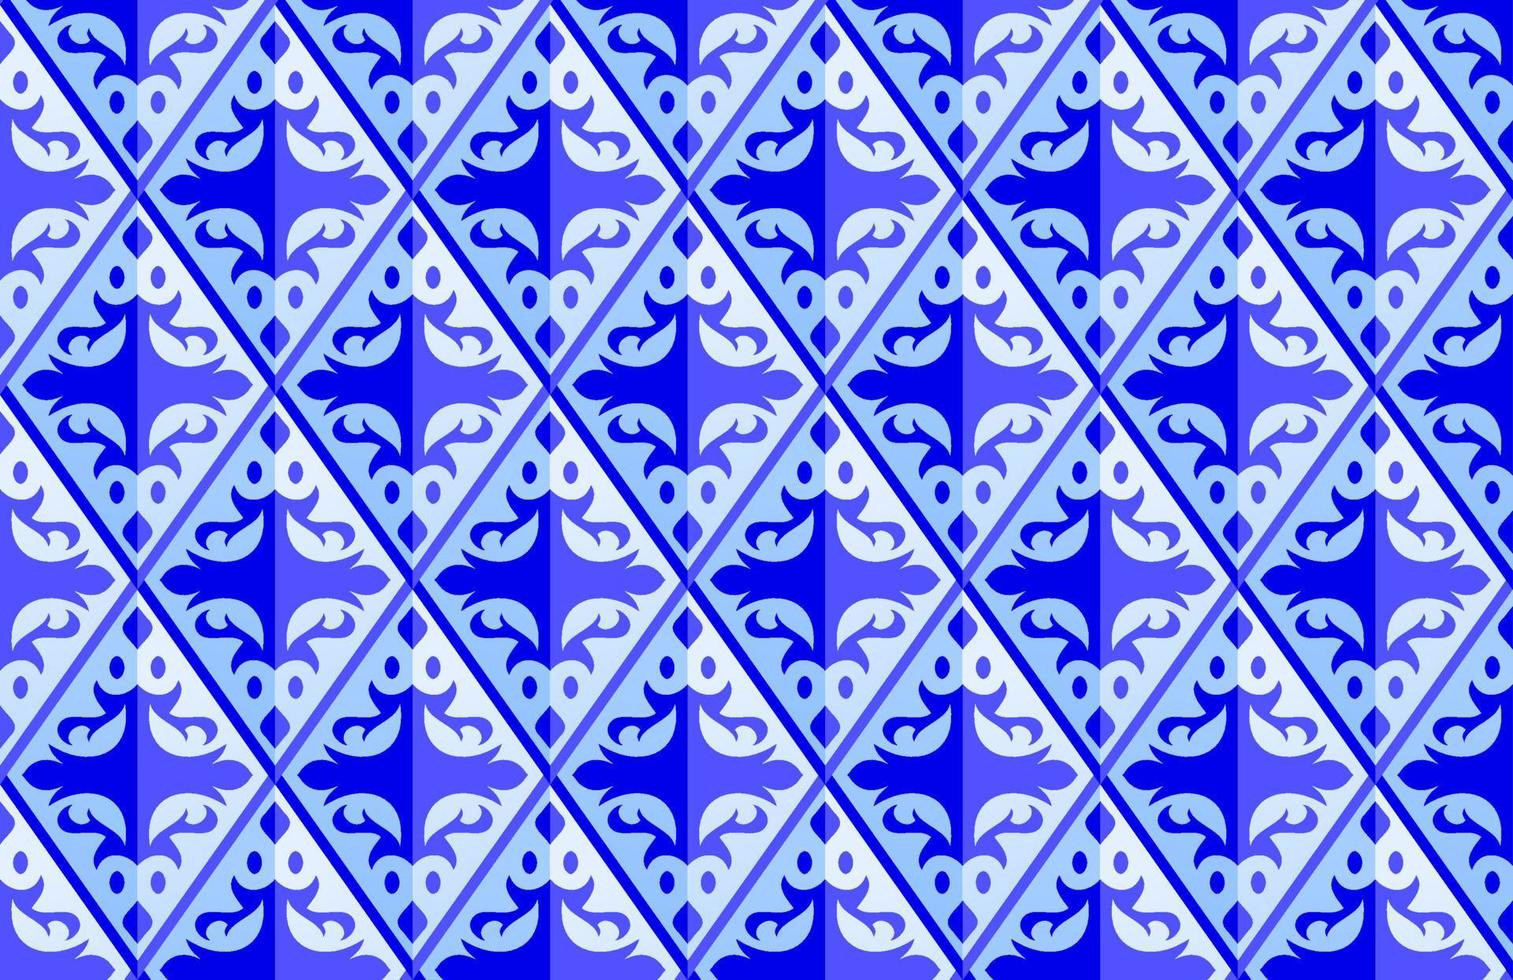 Pattern Batik Blue White Diamond Geometric Tile for Abstract Background Template Poster or Business vector